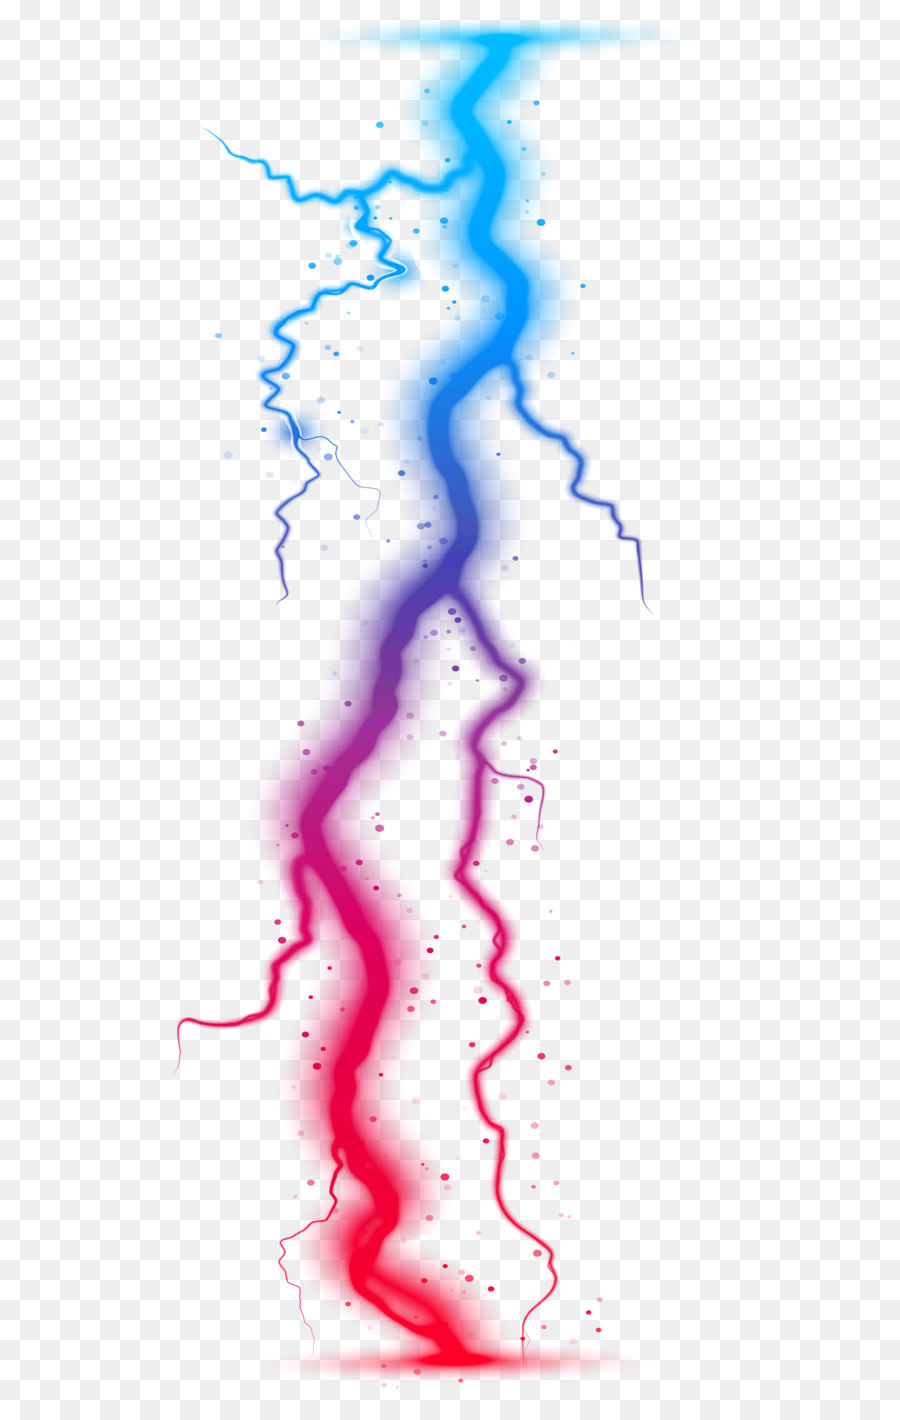 Red White Streamer Transparent PNG Clip Art Image​